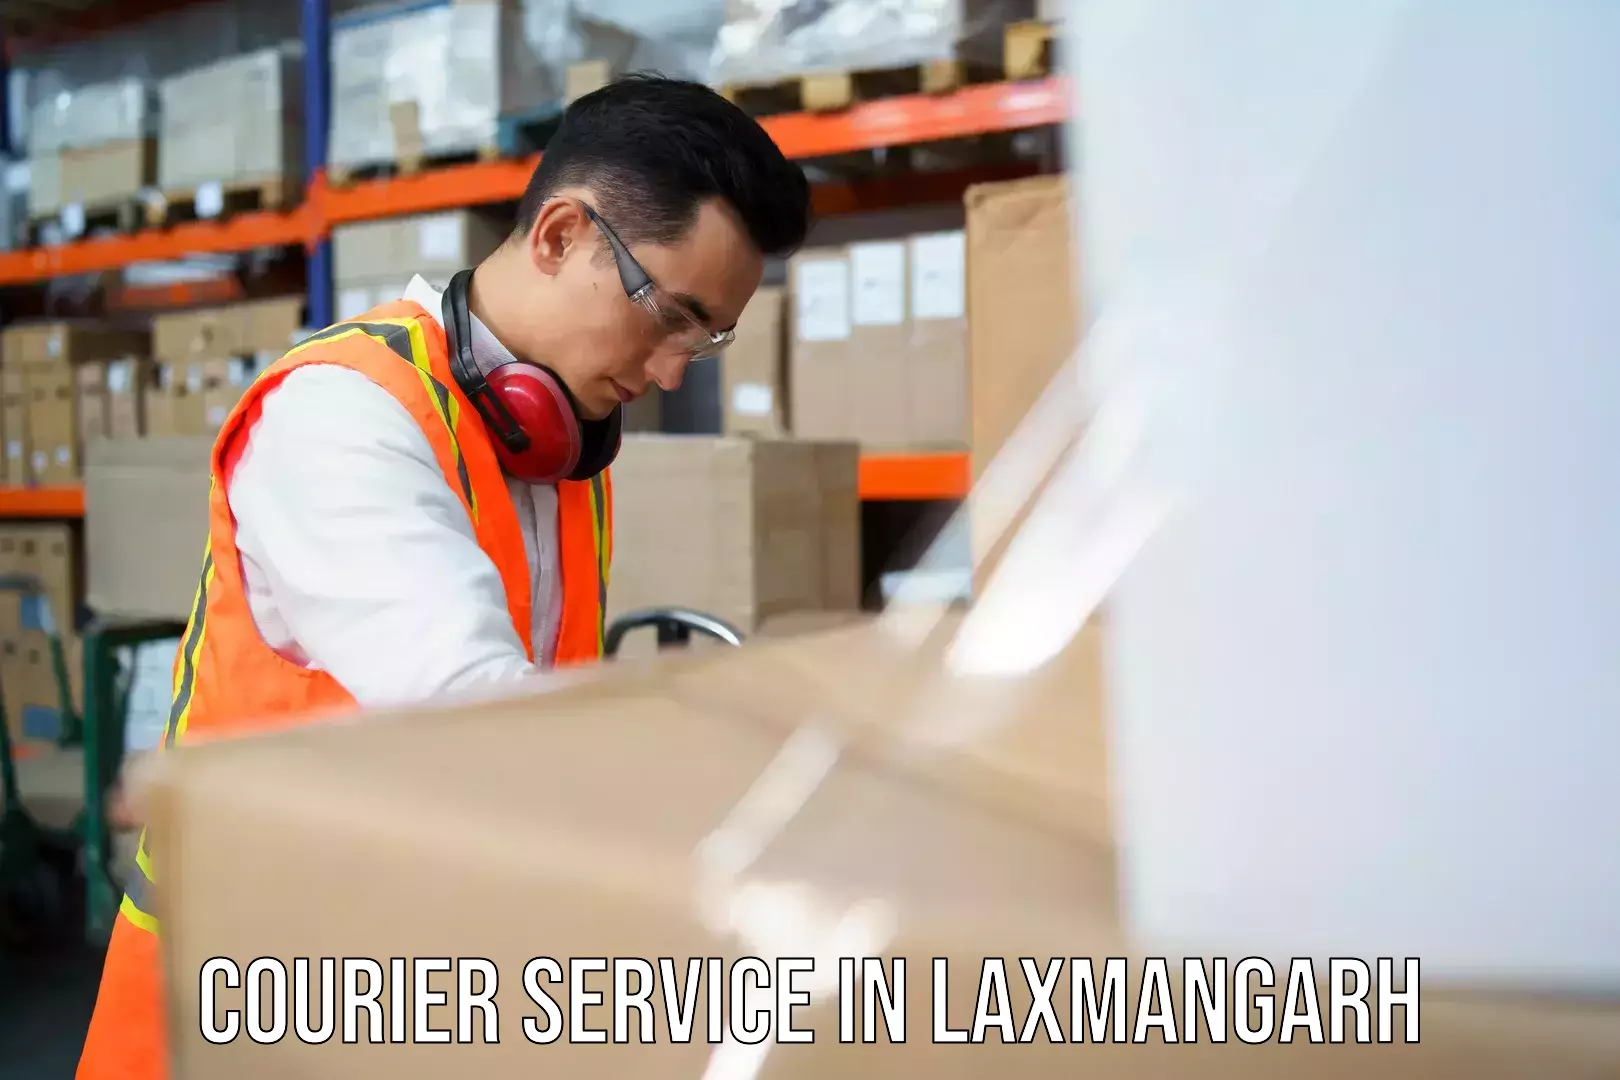 Automated shipping processes in Laxmangarh